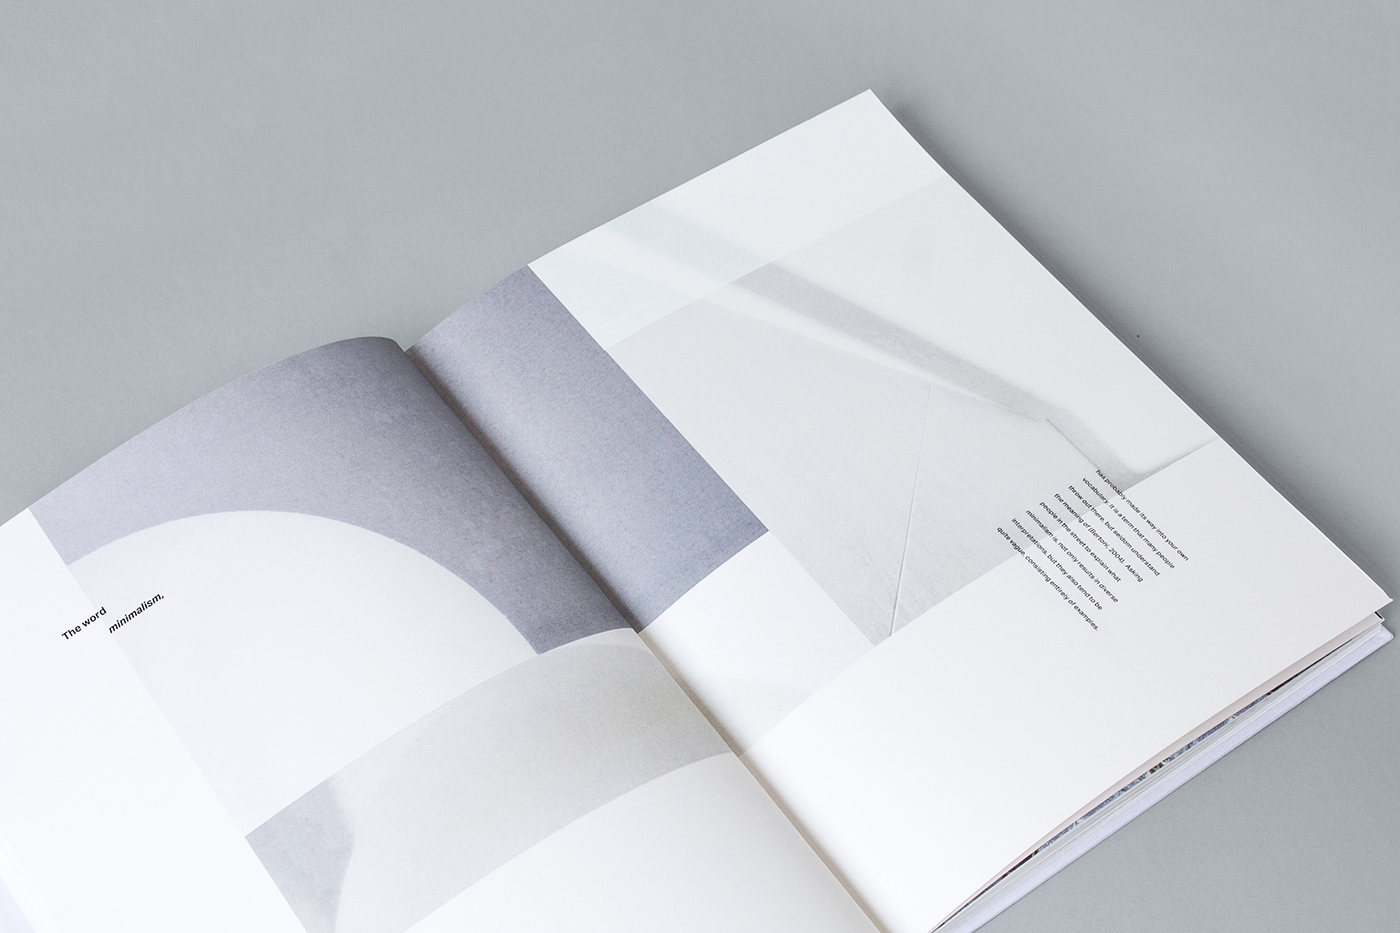 editorial Minimalism minimalist simplistic paper simple Layout typo book texture clean photo Book Binding concept White